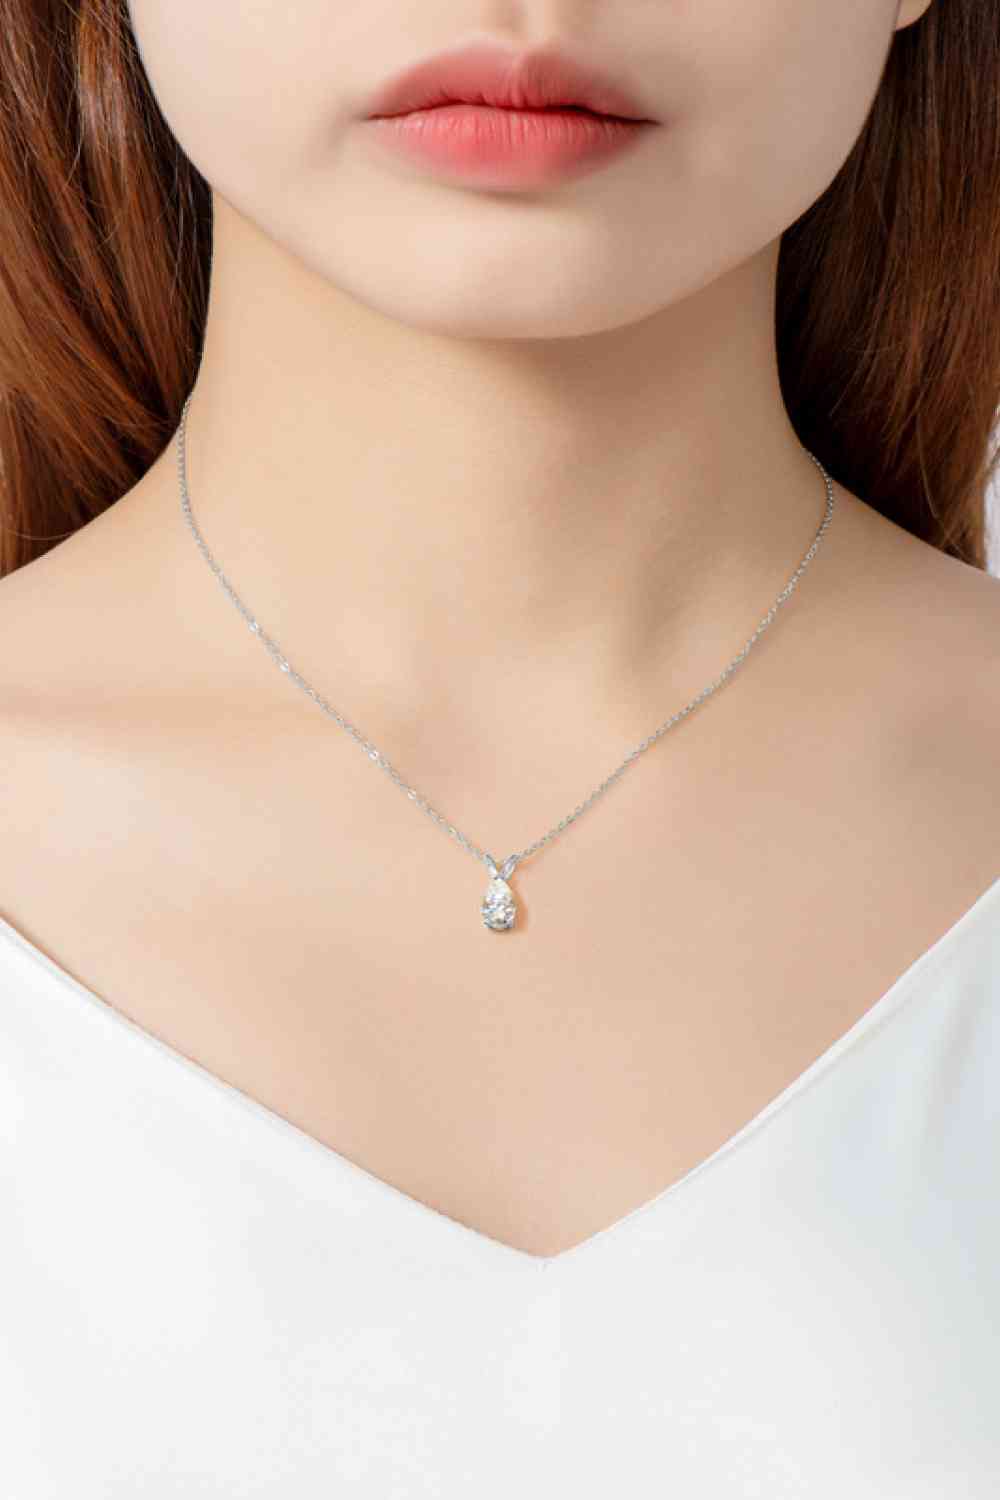 1.5 Carat Moissanite Pendant 925 Sterling Silver Necklace - lolaluxeshop